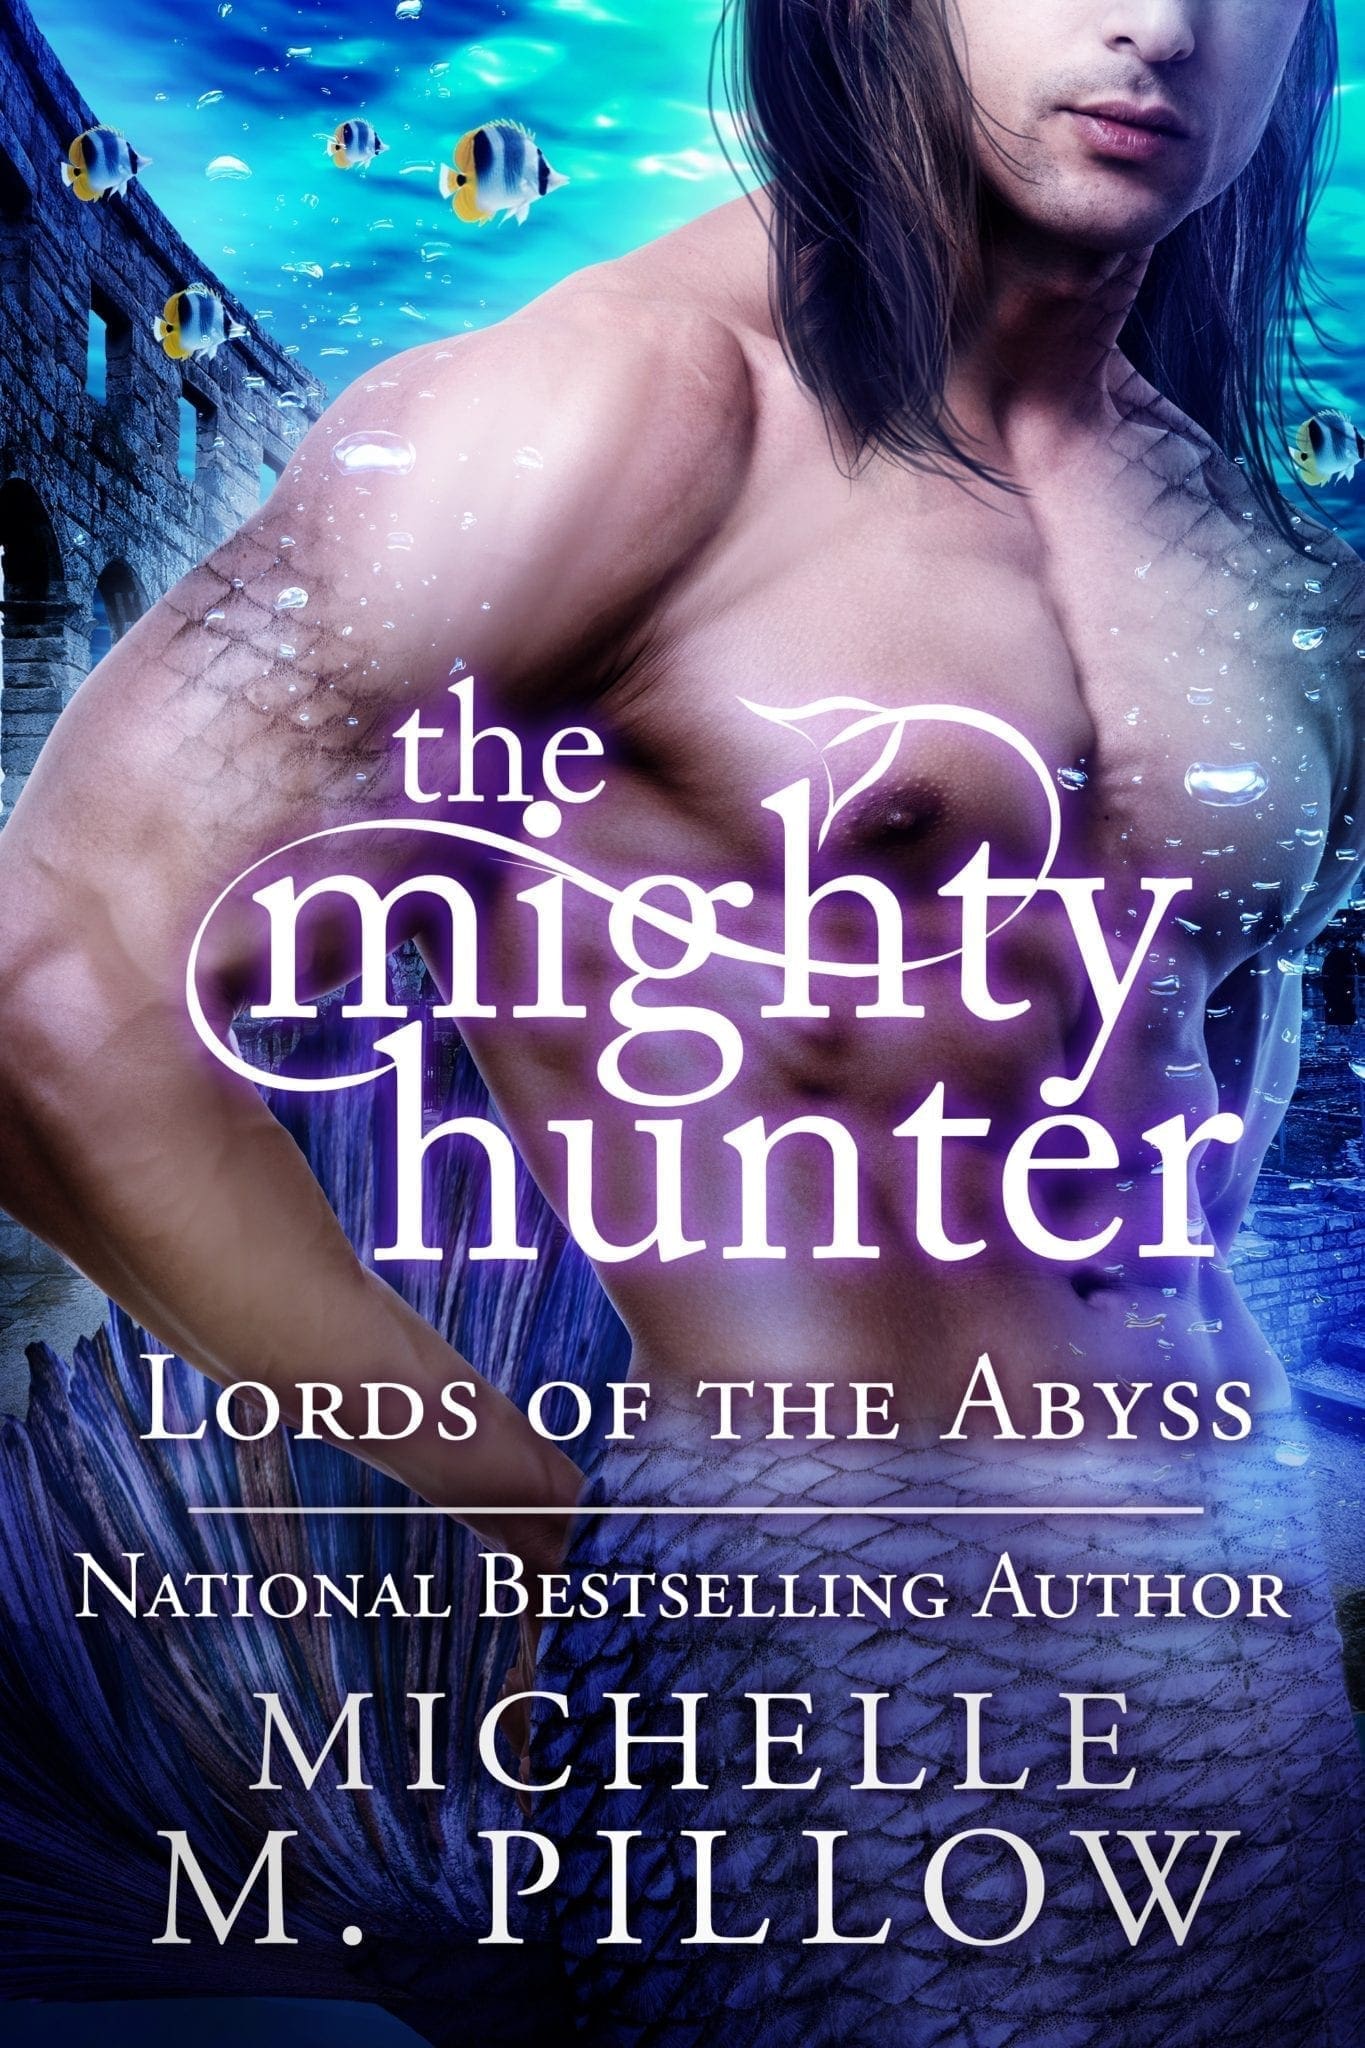 The Mighty Hunter Book Cover of the Lords of the Abyss series